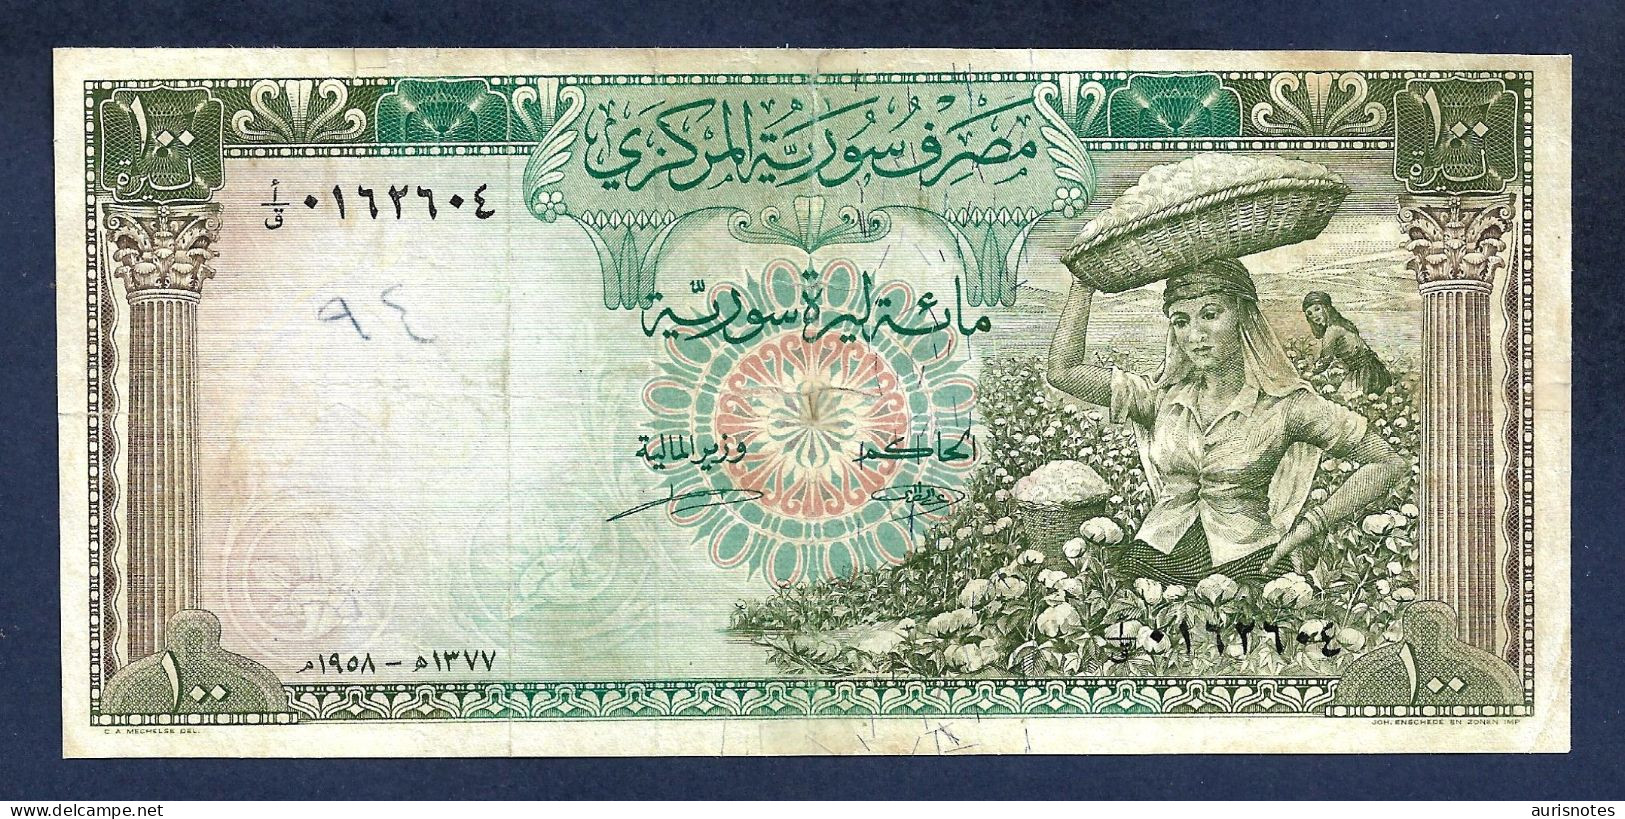 Syria 100 Pounds 1958 P91a First Issue Scarce Fine/VF - Syrië